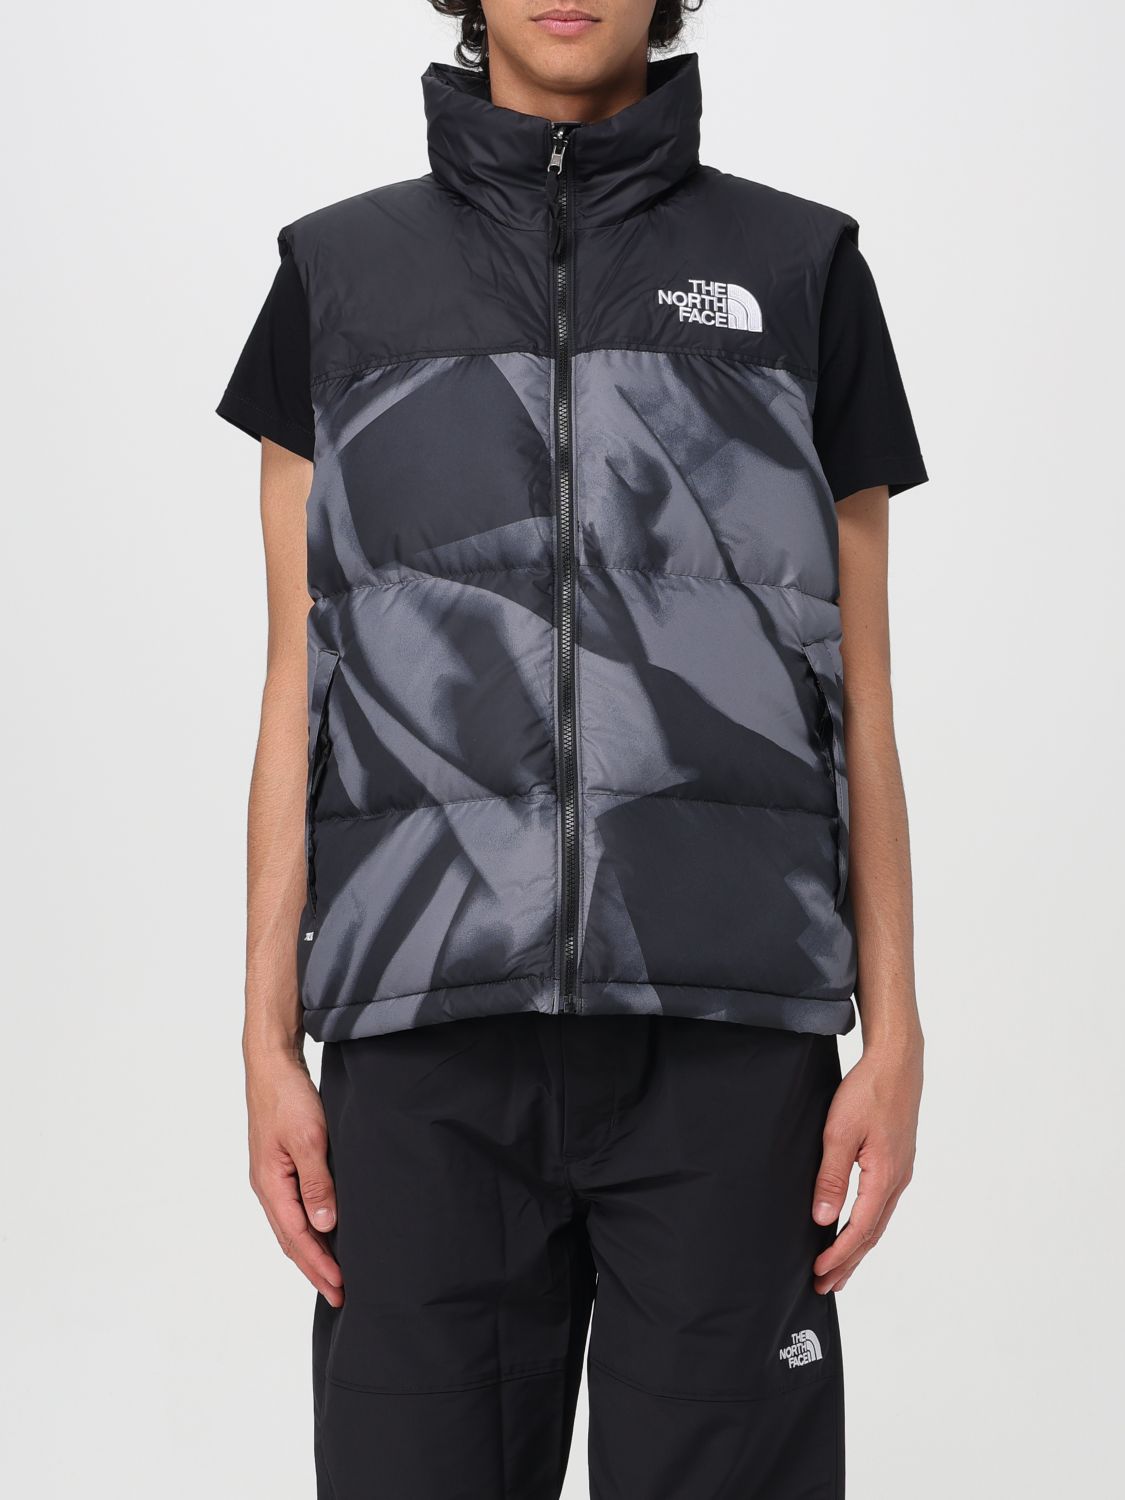 The North Face Jacket THE NORTH FACE Men colour Grey